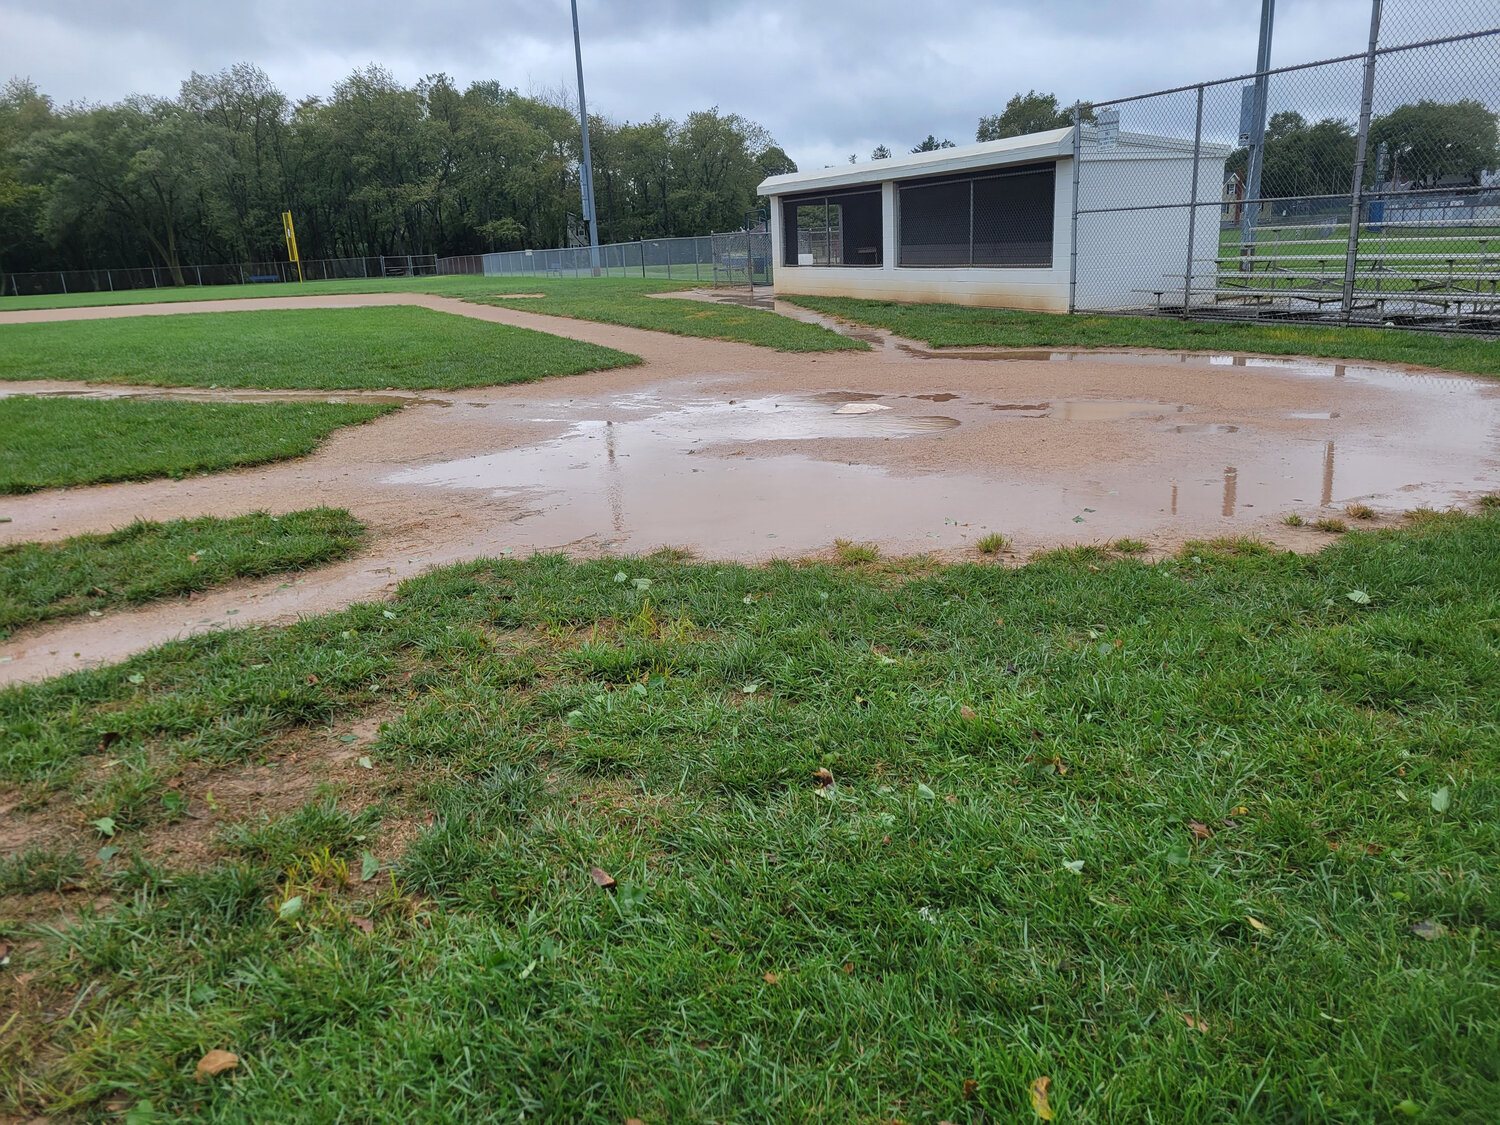 Home plate is surrounded by water at a baseball field in Silver Lake Park in Middletown Saturday morning.